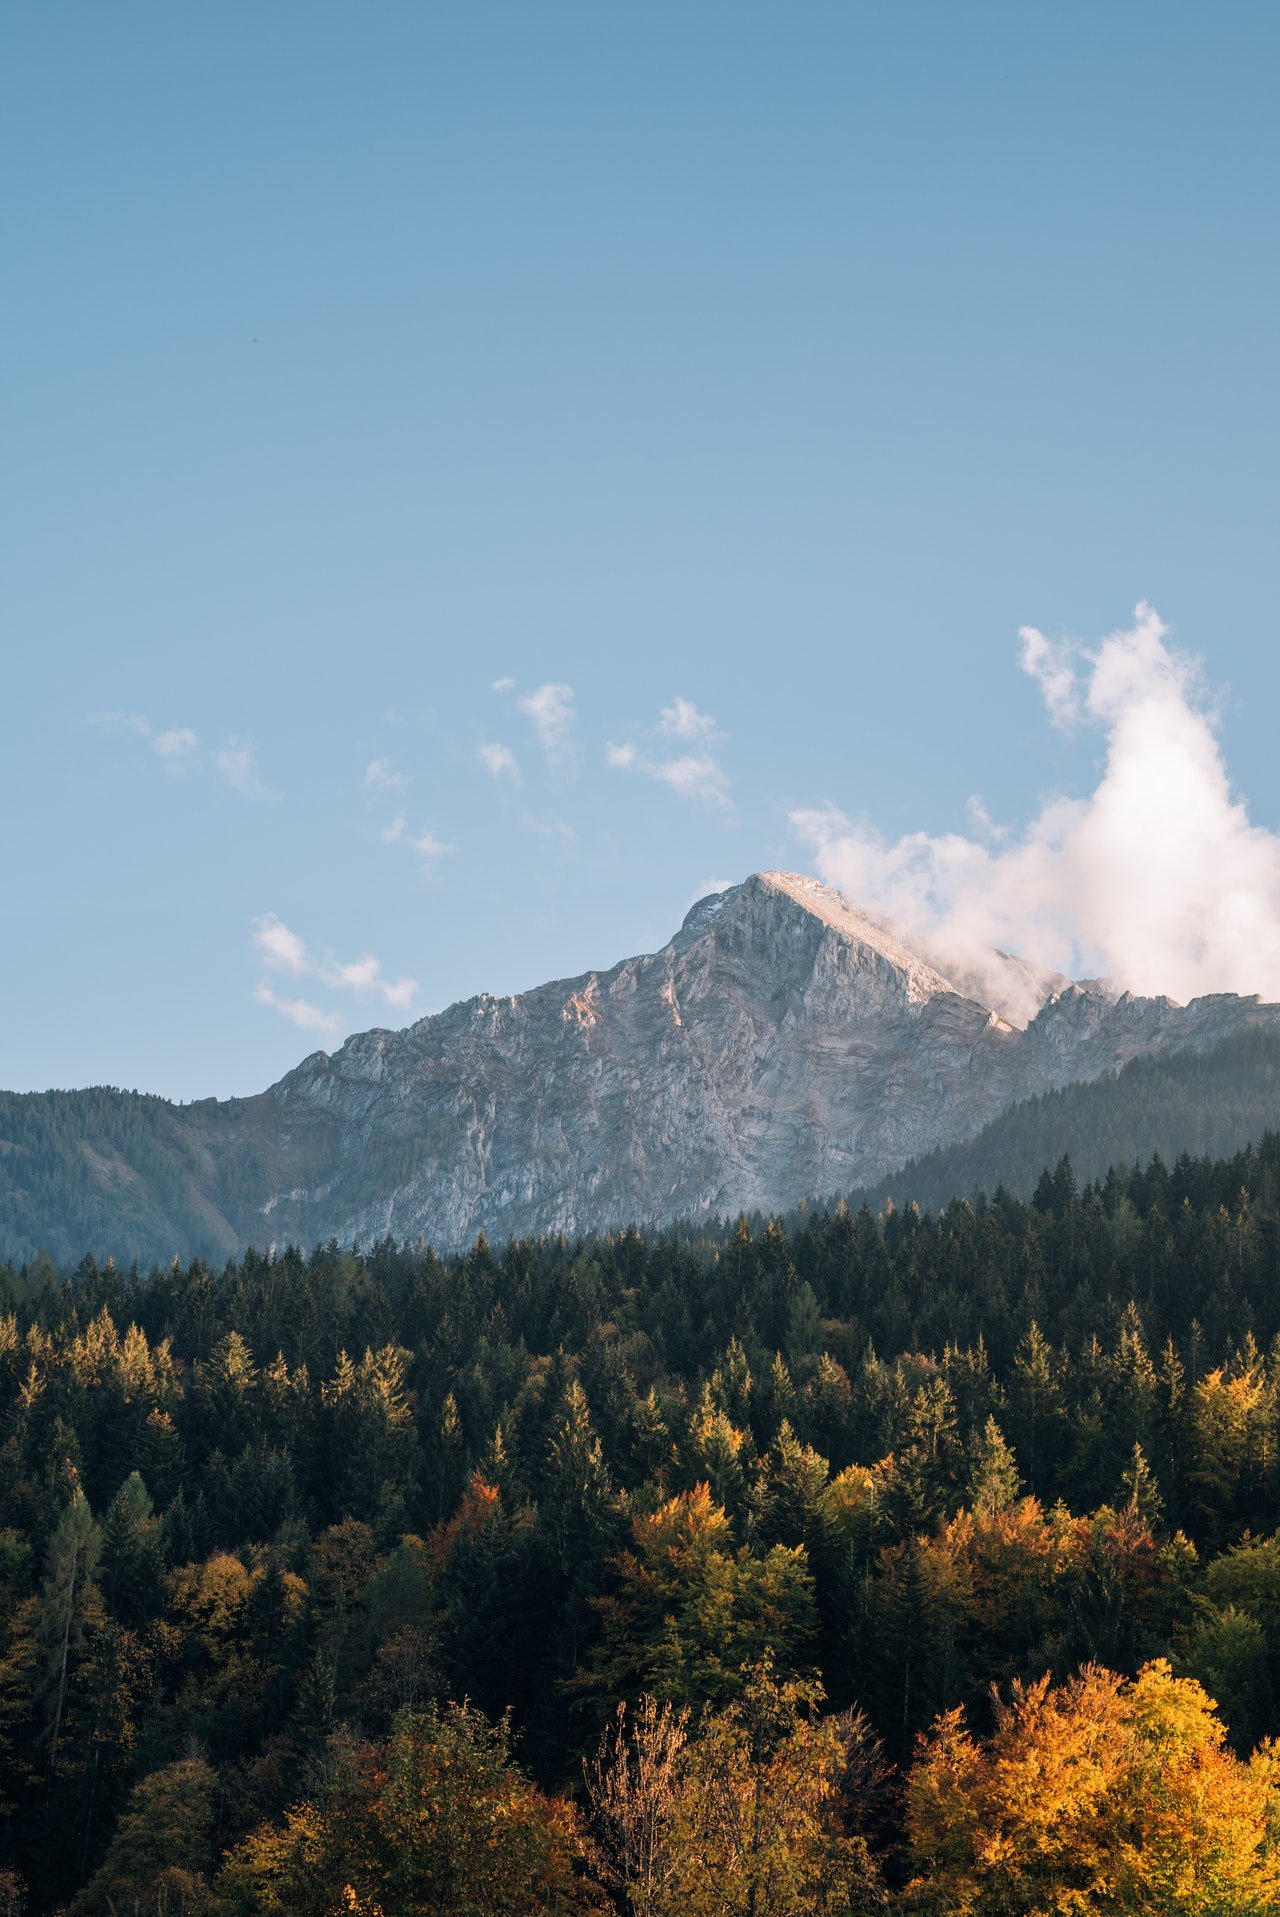 Photo of a mountain behind lush evergreen forest | Photo: Pexels